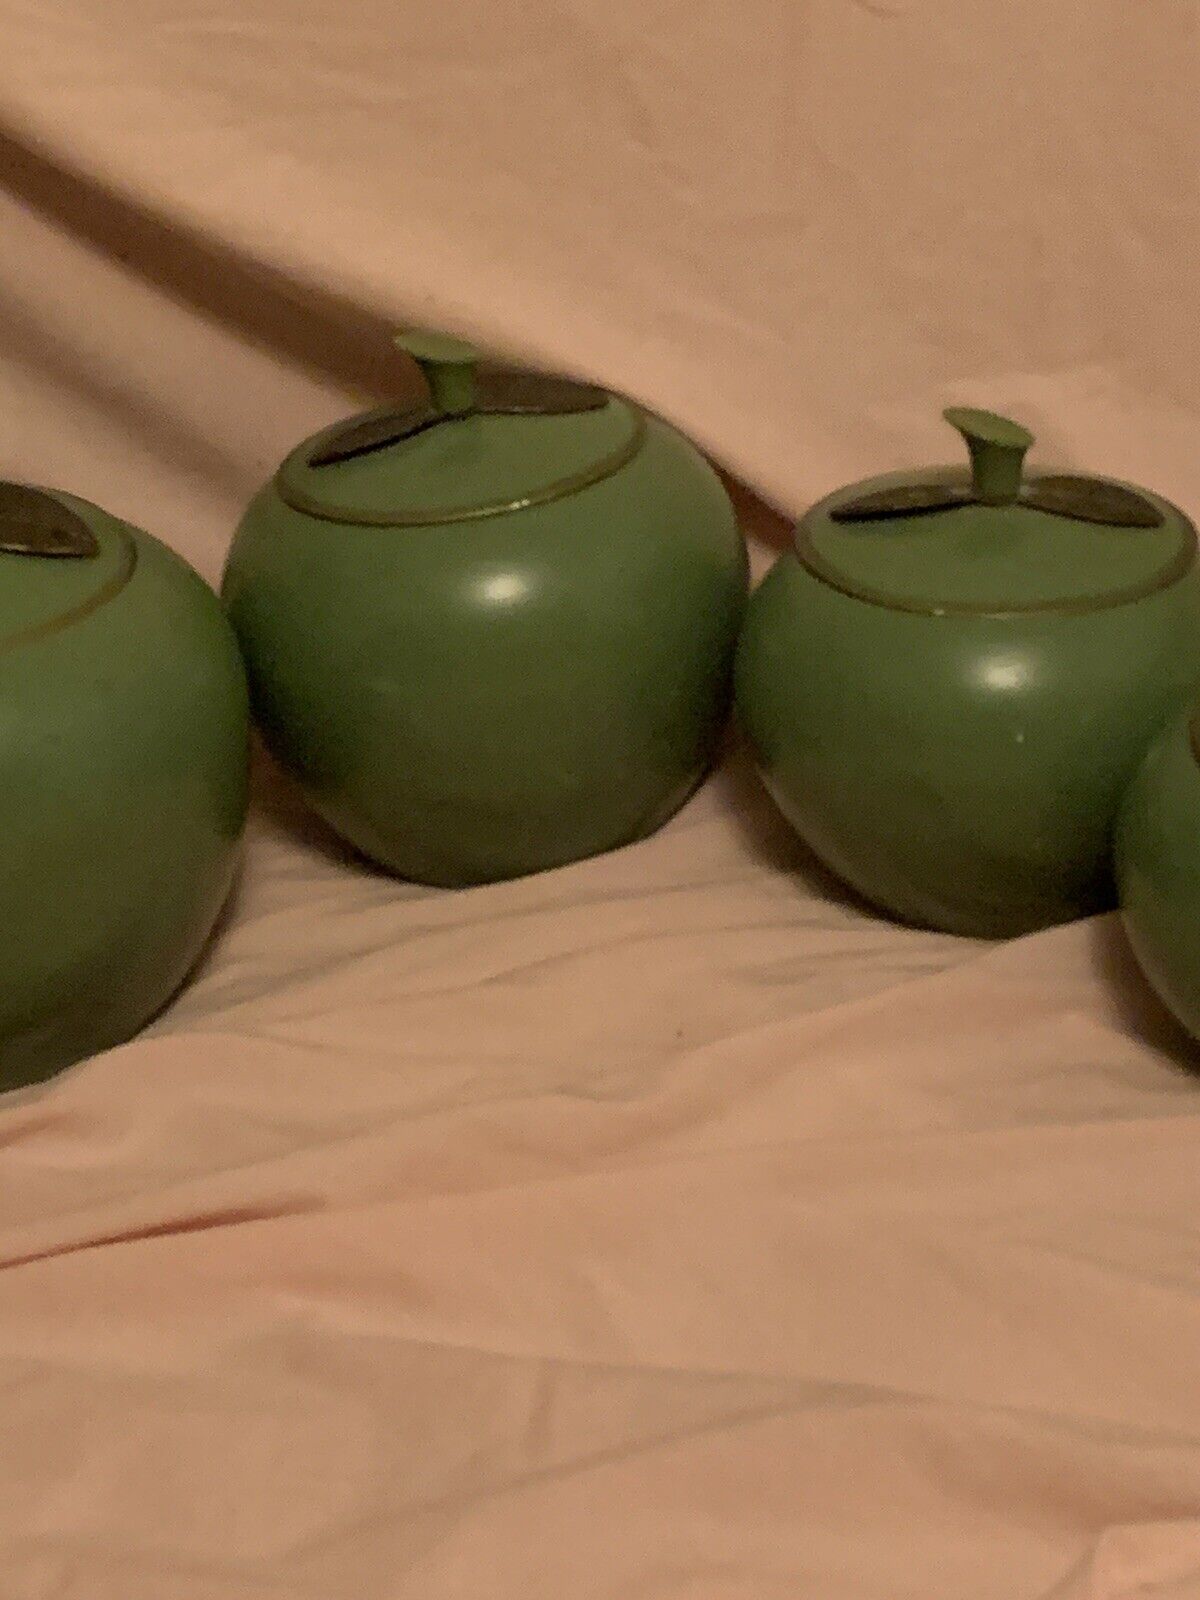 Rare Vintage Canisters Green Apple Aluminum. Super Cute